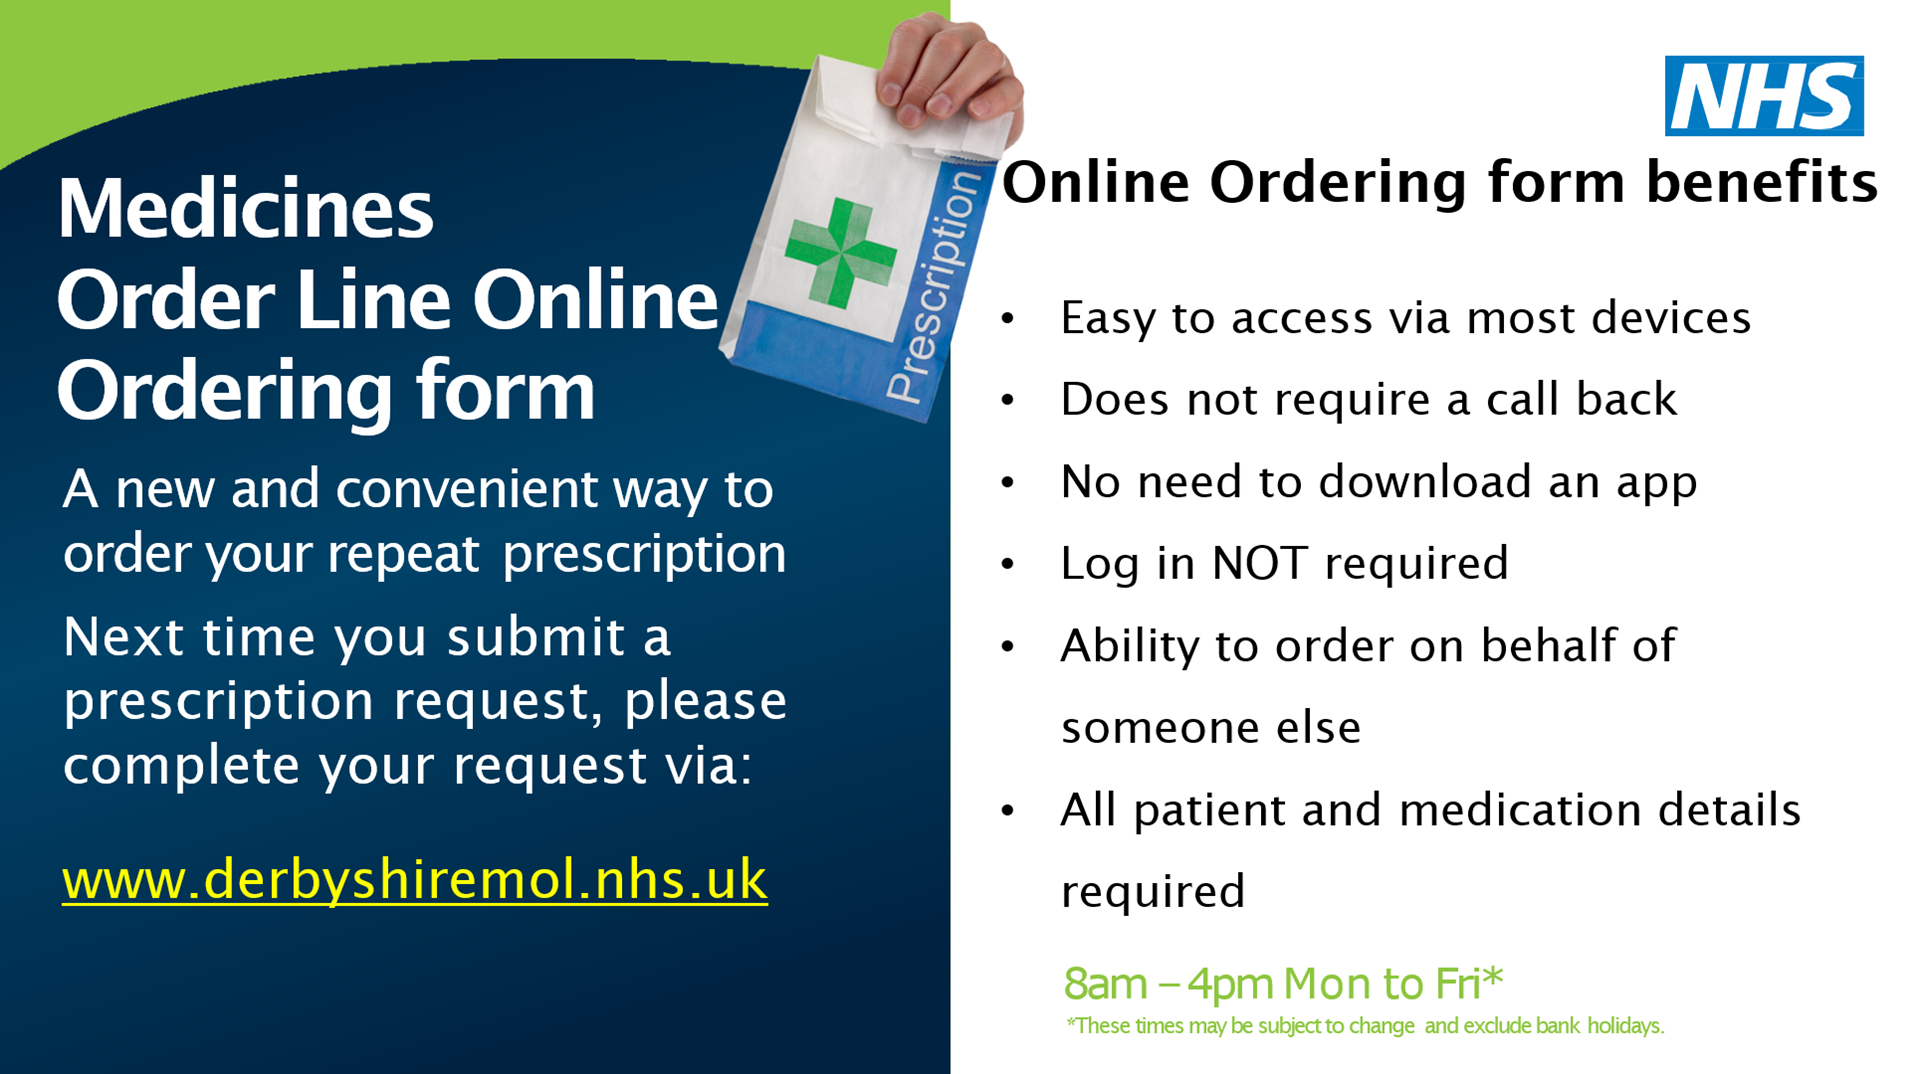 Medicines Order Line Online Ordering form. A new and convenient way to order your repeat prescription Next time you submit a prescription request, please complete your request via: www.derbyshiremol.nhs.uk. Online Ordering form benefits - easy to access via most devices, does not require a call back, no need to download an app, log in not required, ability to order on behalf of someone else, all patient and medication details required 8am-4pm Mon-Fri* *these times may be subject to change and exclude bank holidays